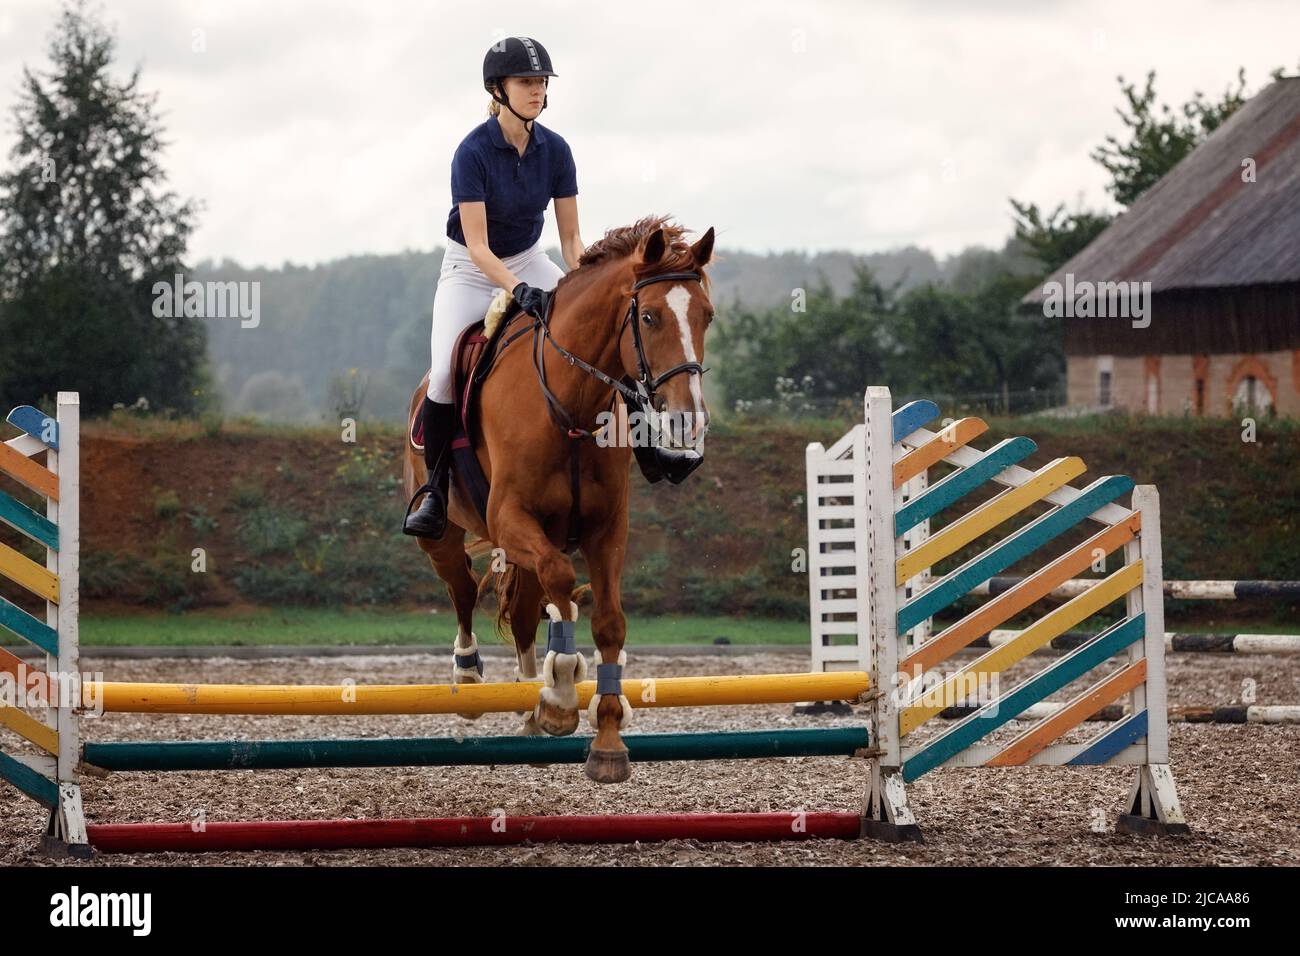 Equestrian jumper - Young girl jumping with cherry horse she completing a jump. Stock Photo